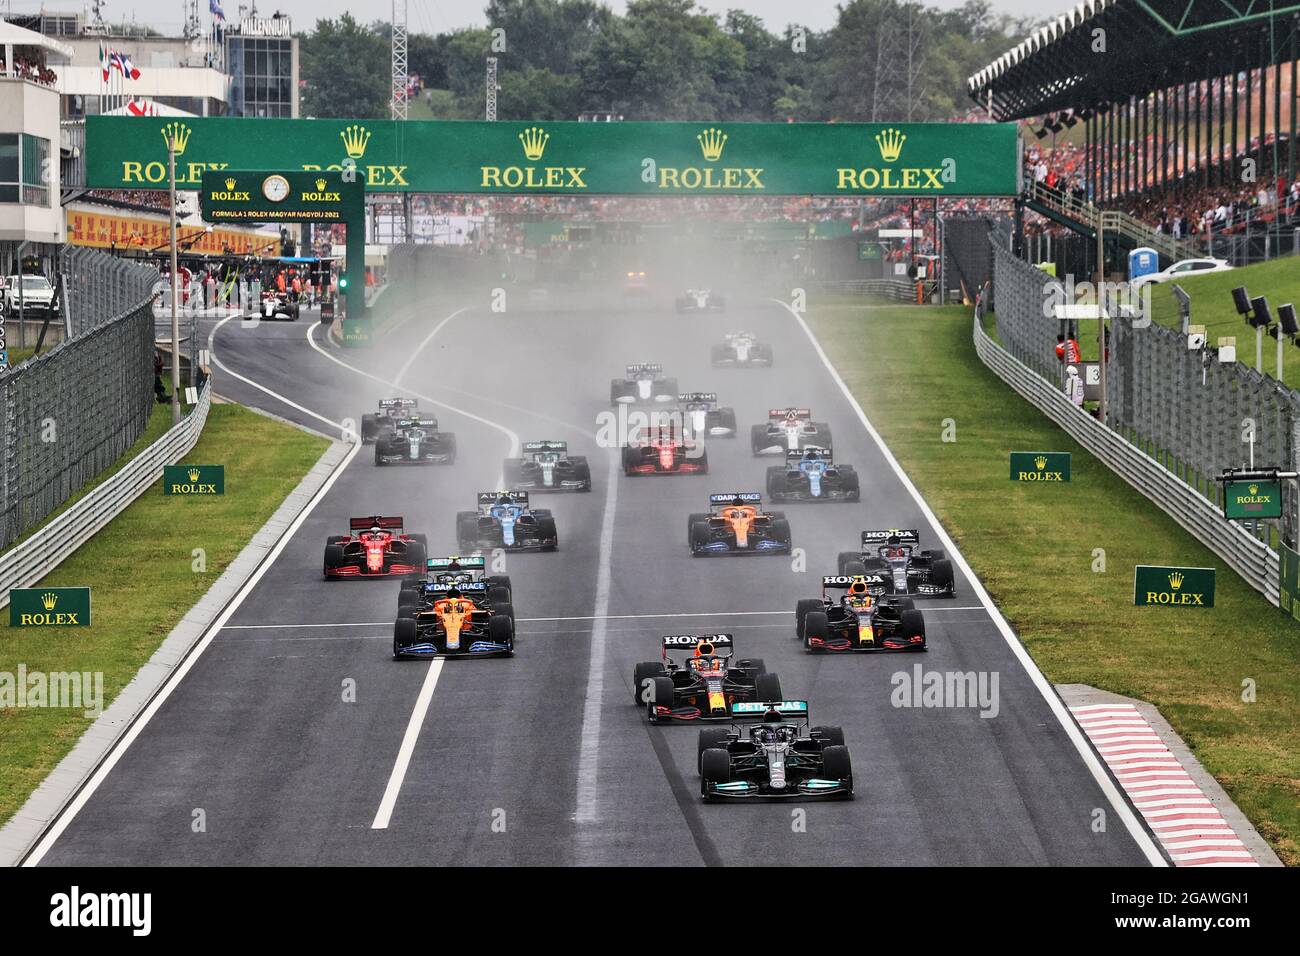 Budapest, Hungary. 01st Aug, 2021. Lewis Hamilton (GBR) Mercedes AMG F1 W12 leads at the start of the race. Hungarian Grand Prix, Sunday 1st August 2021